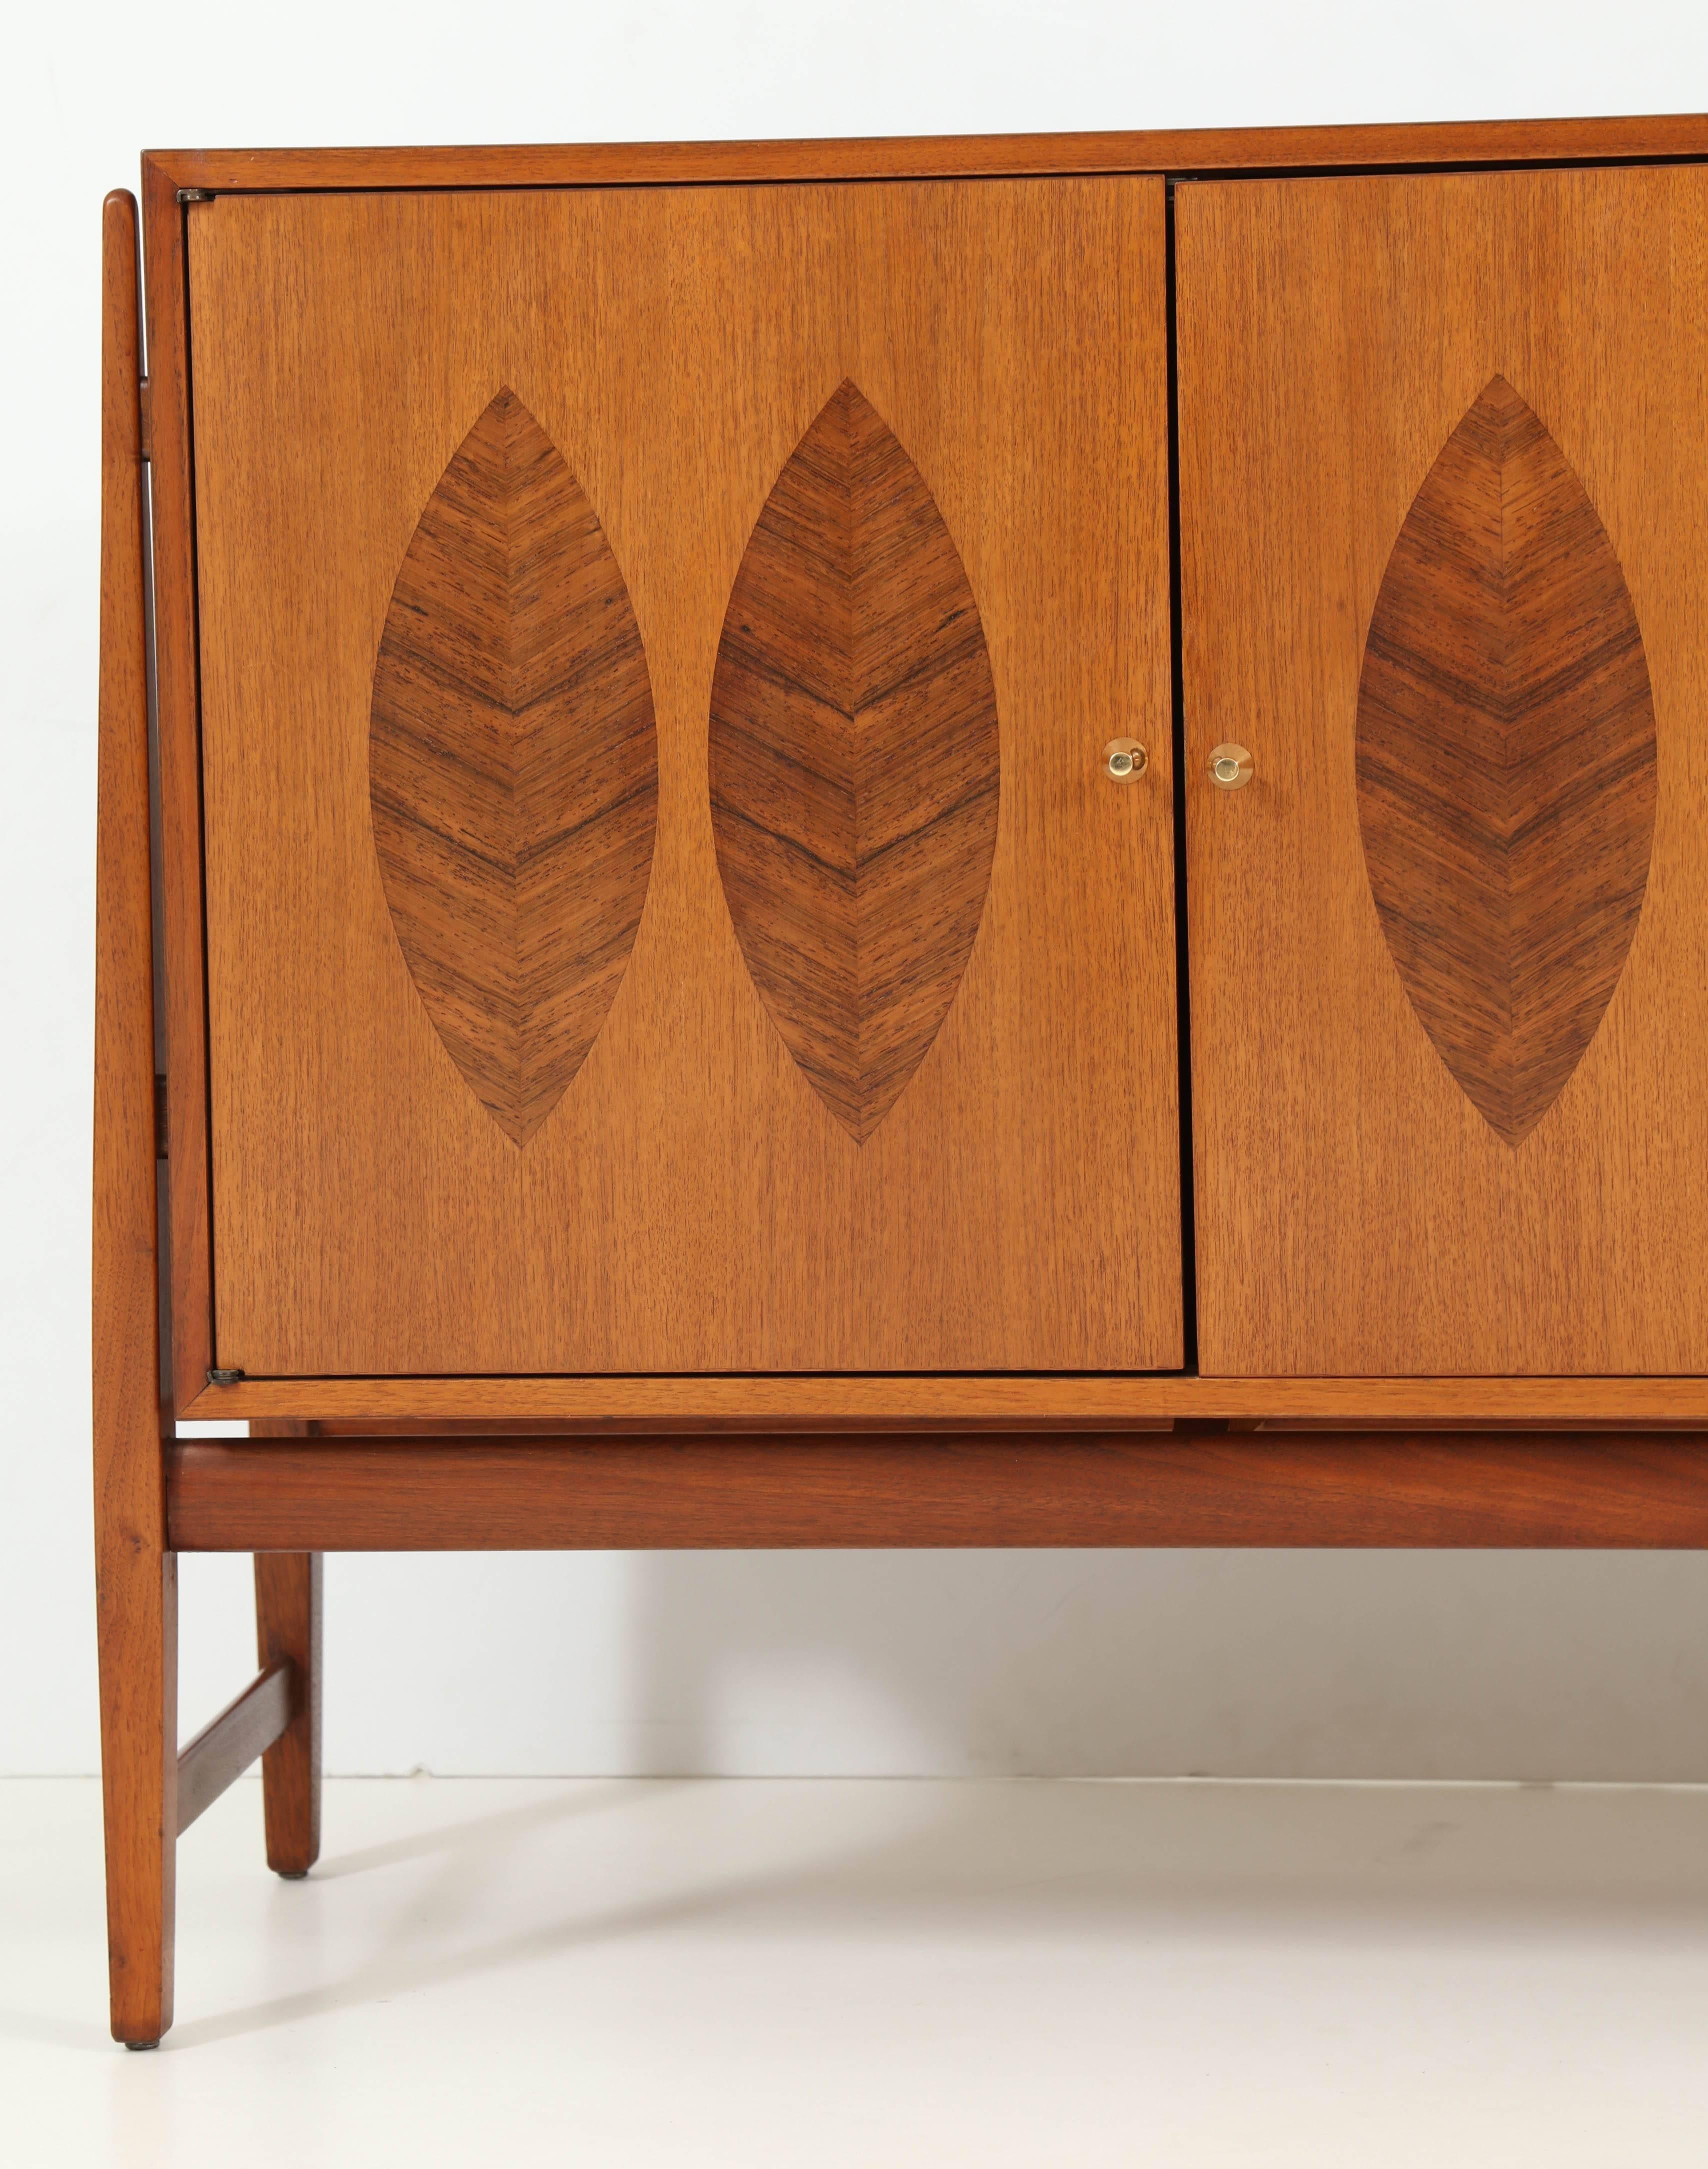 American Modernist Kipp Stewart 1960s Teak and Rosewood Credenza In Excellent Condition For Sale In Washington, DC